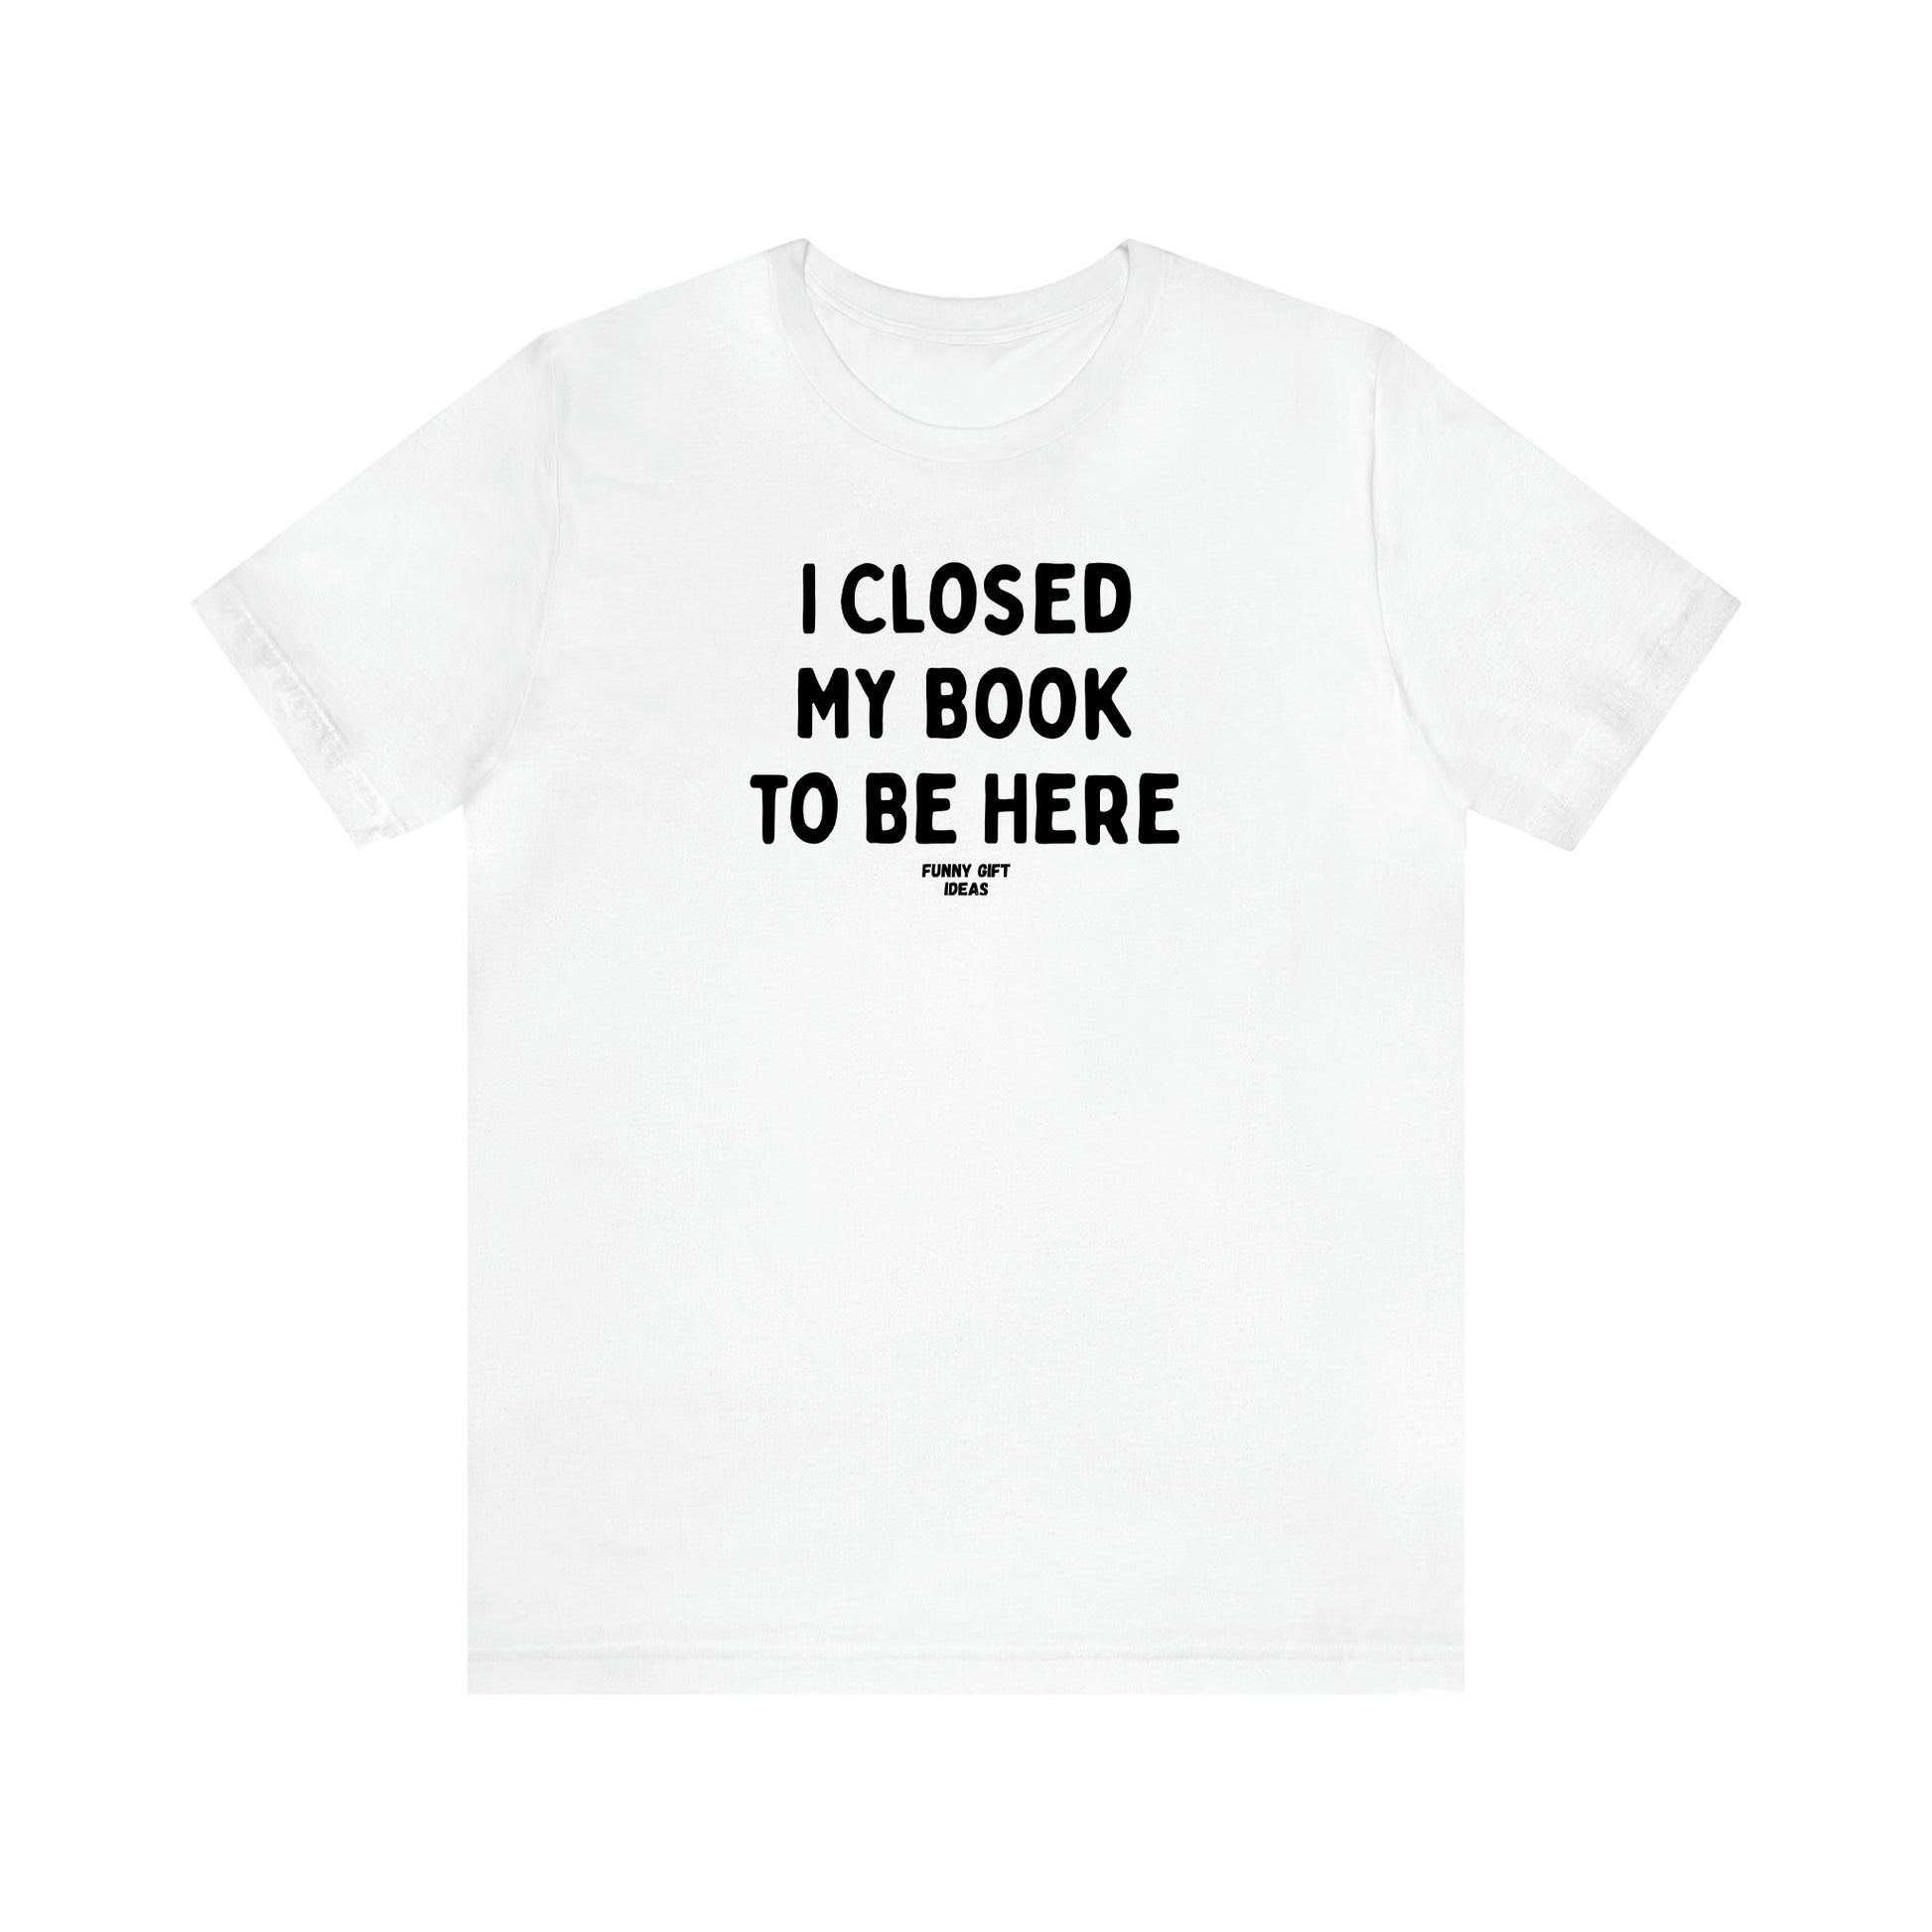 Women's T Shirts I Closed My Book to Be Here - Funny Gift Ideas